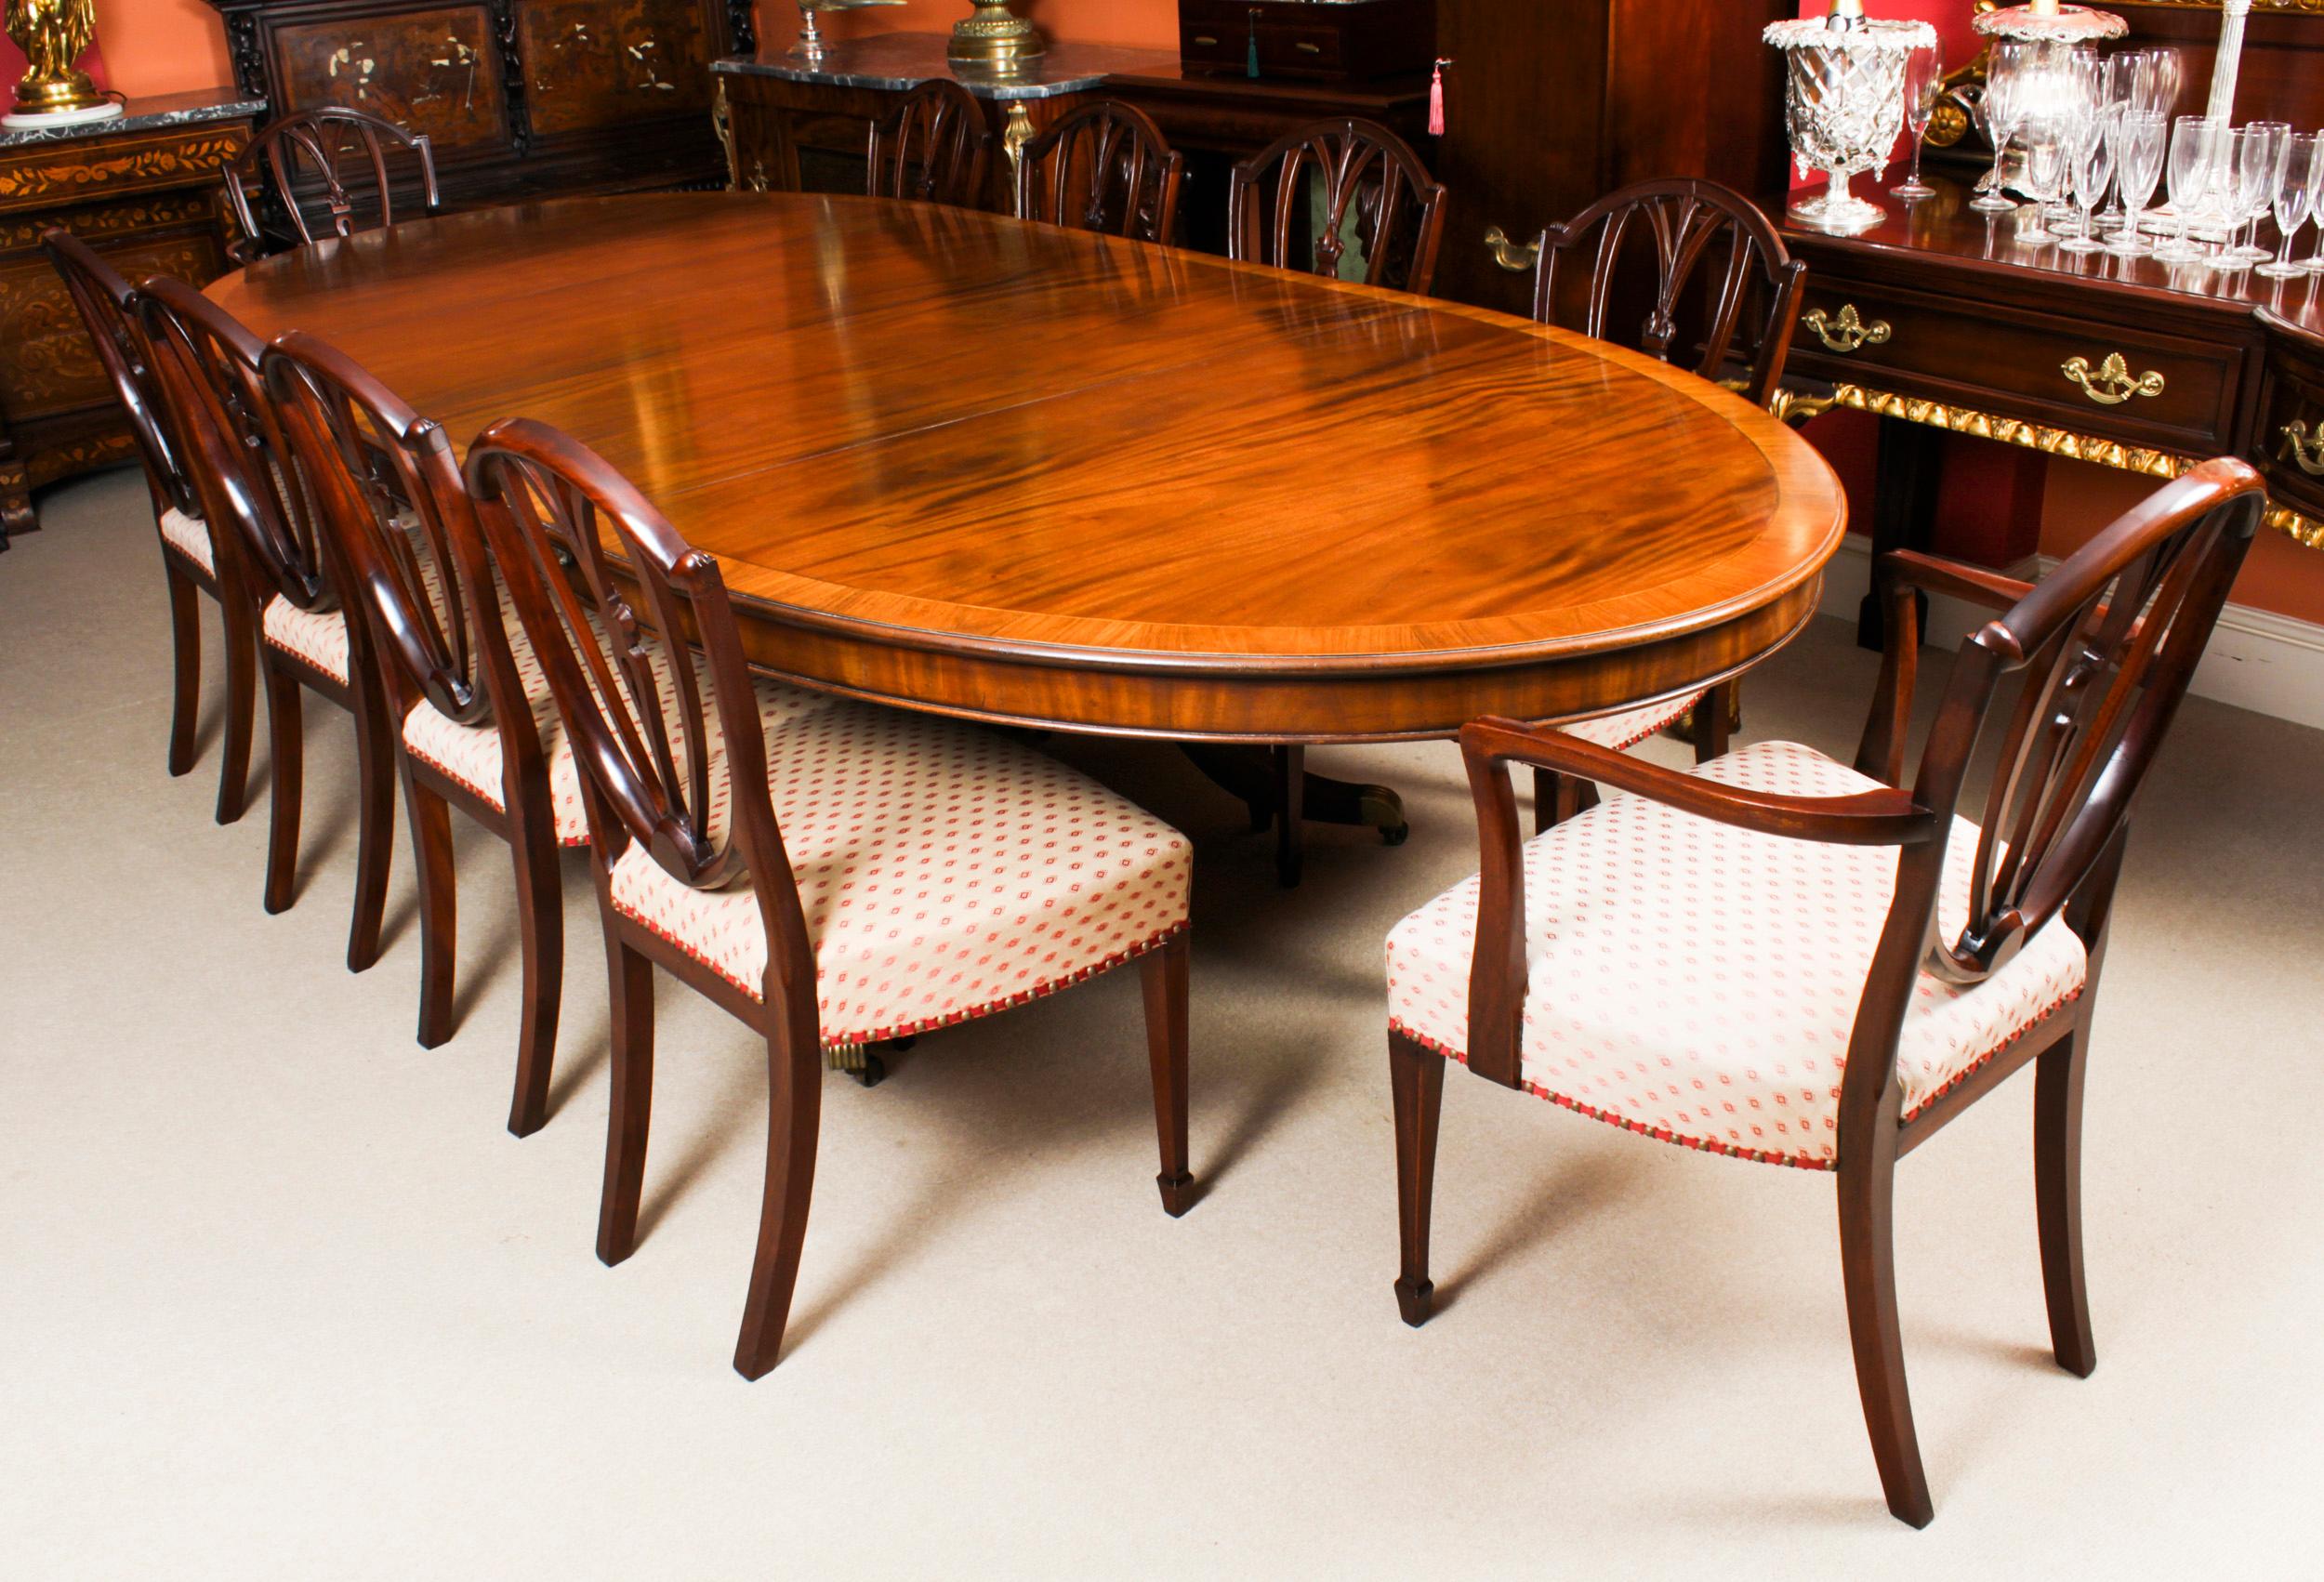 This is a fabulous antique Regency Revival oval flame mahogany extending dining table, circa 1920 in date. 
 
The oval table been hand-crafted from flame mahogany with crossbanded decoration, and has two original leaves.
 
The two leaves can be